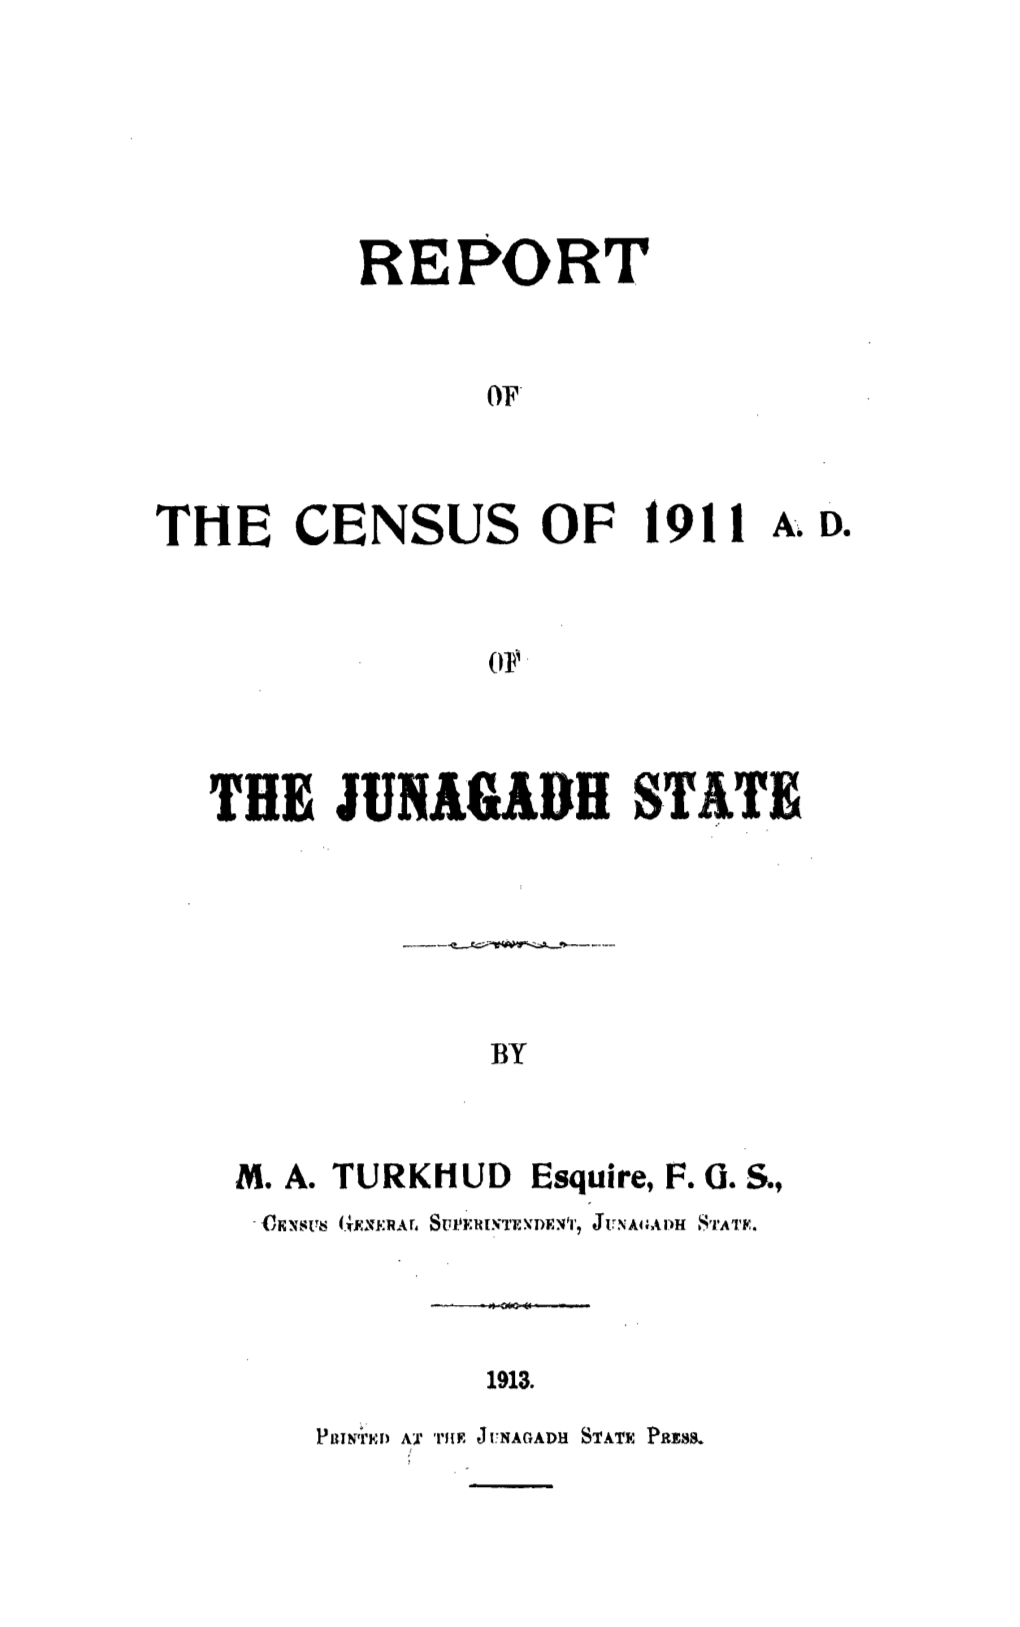 Report of the Census of 1911 A. D. of the Junagadh State